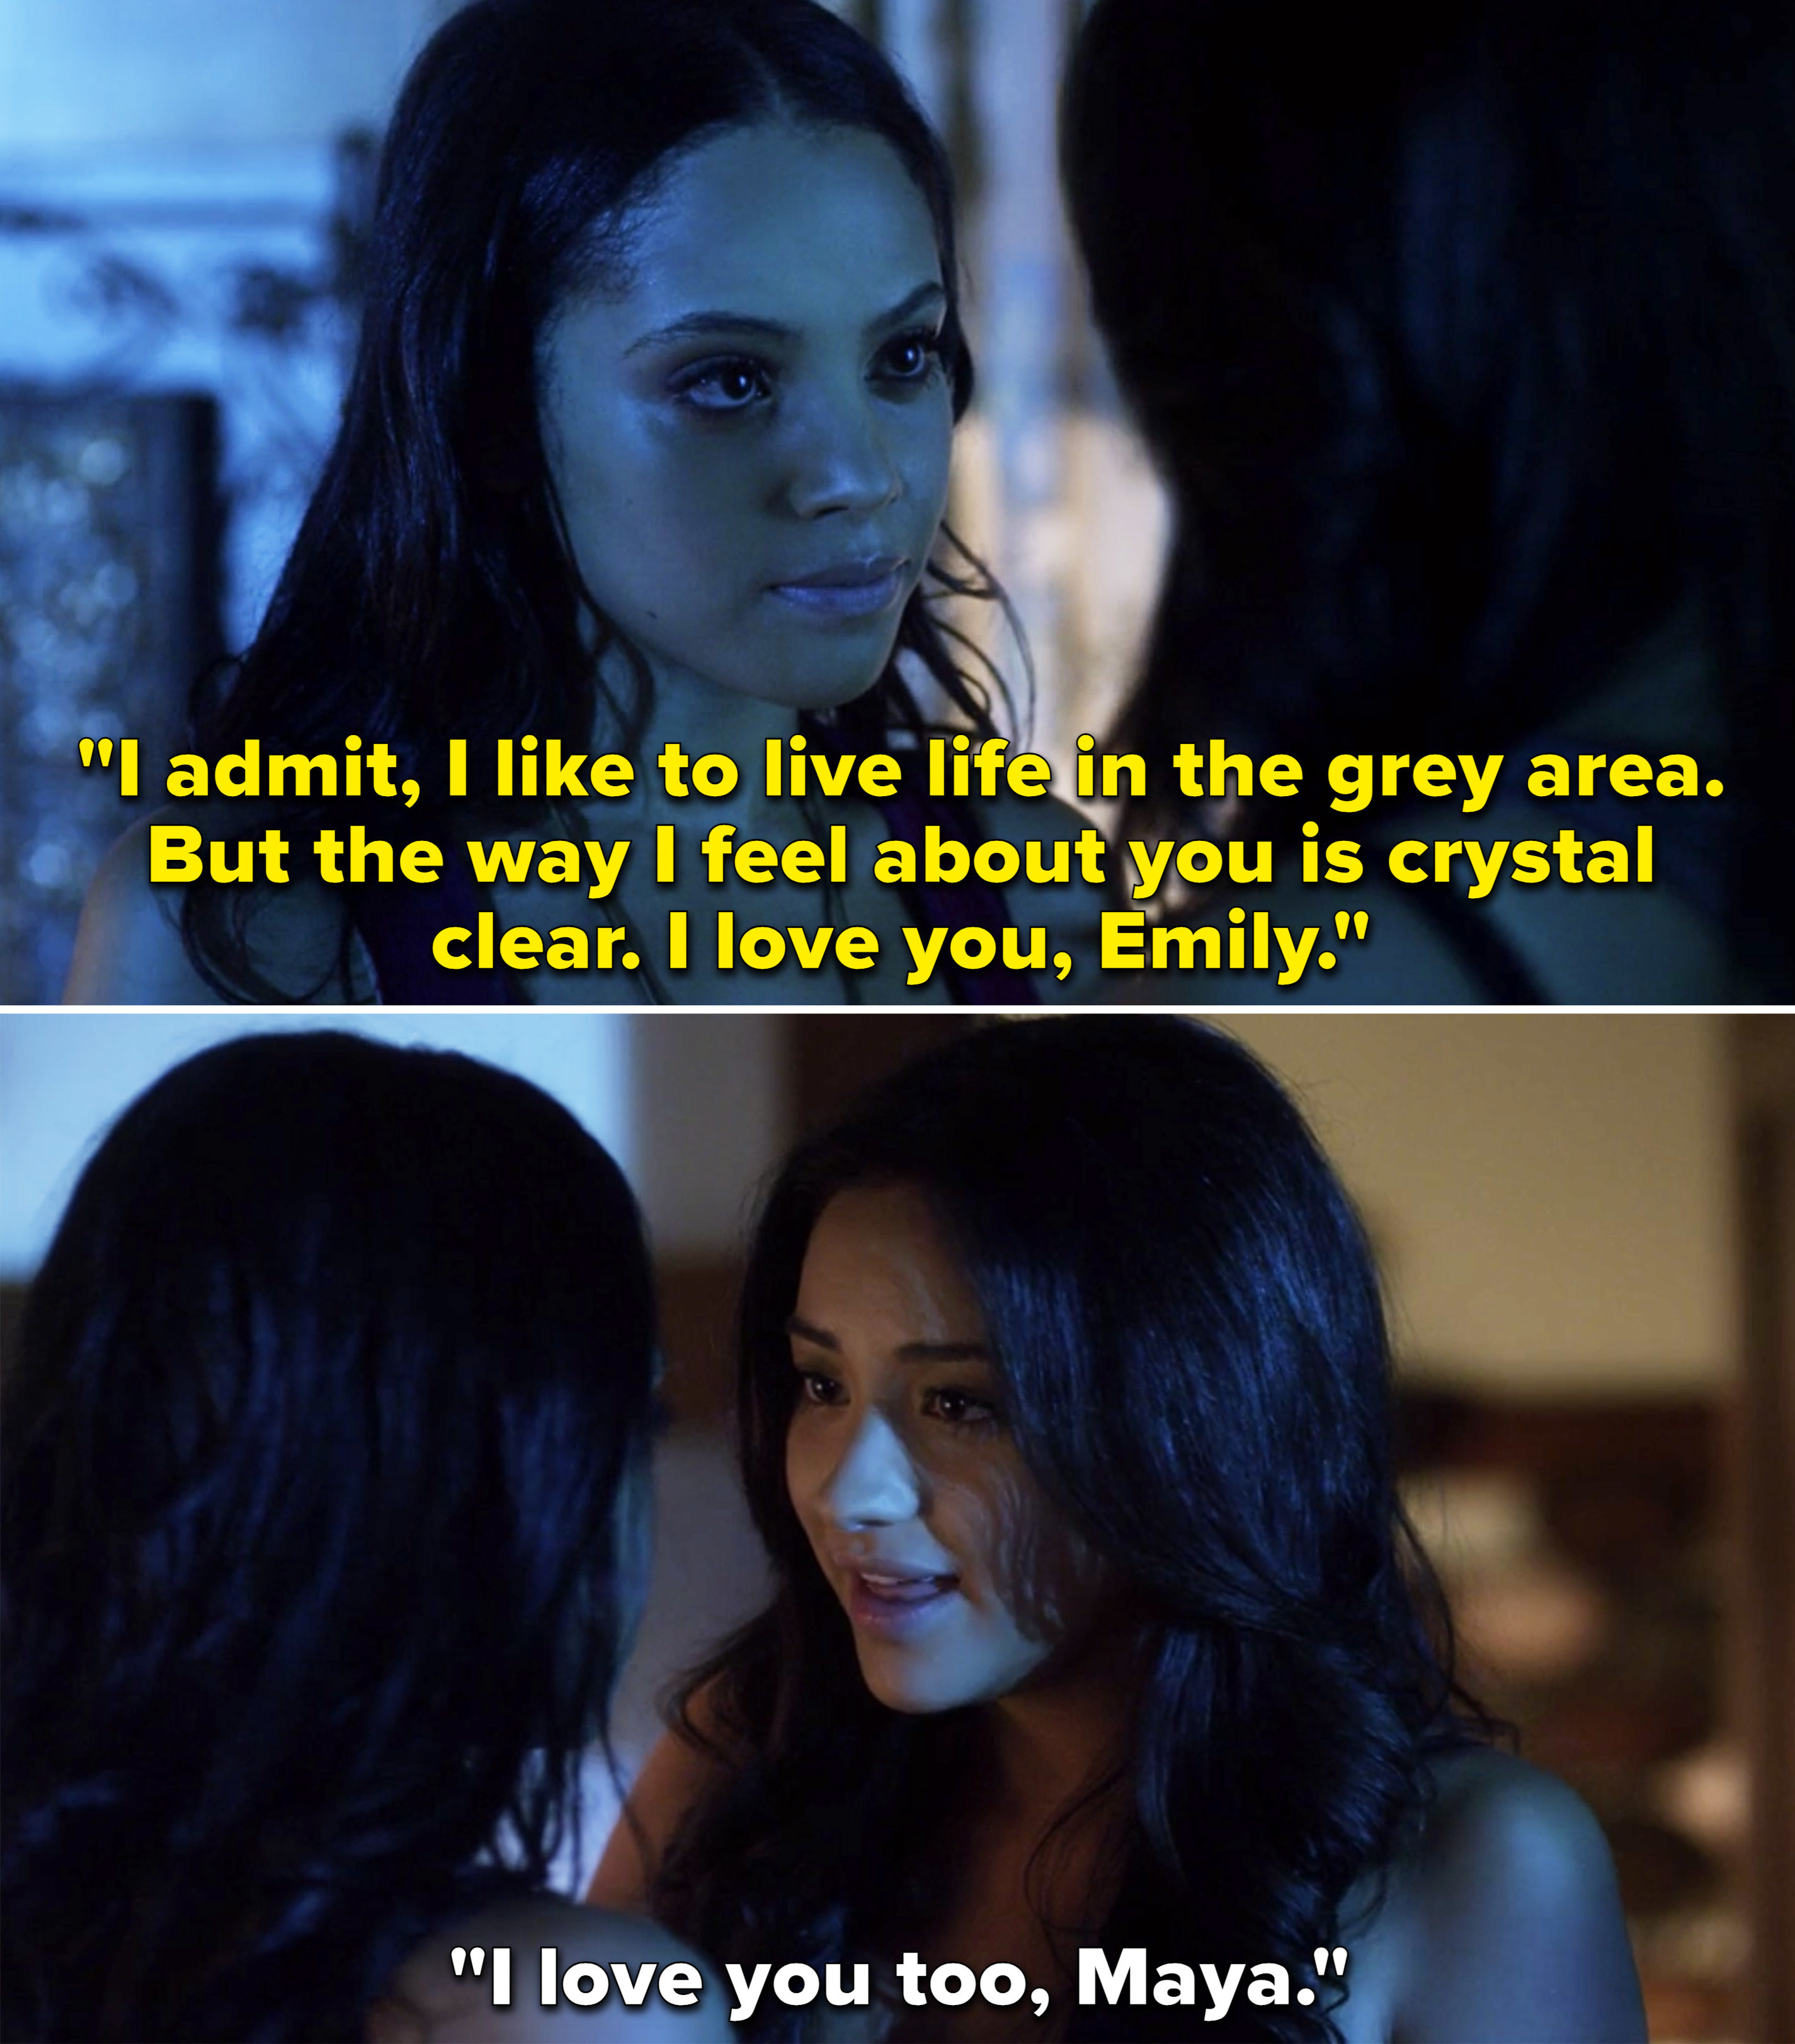 Maya: &quot;The way I feel about you is crystal clear, I love you&quot; Emily: &quot;I love you too&quot;